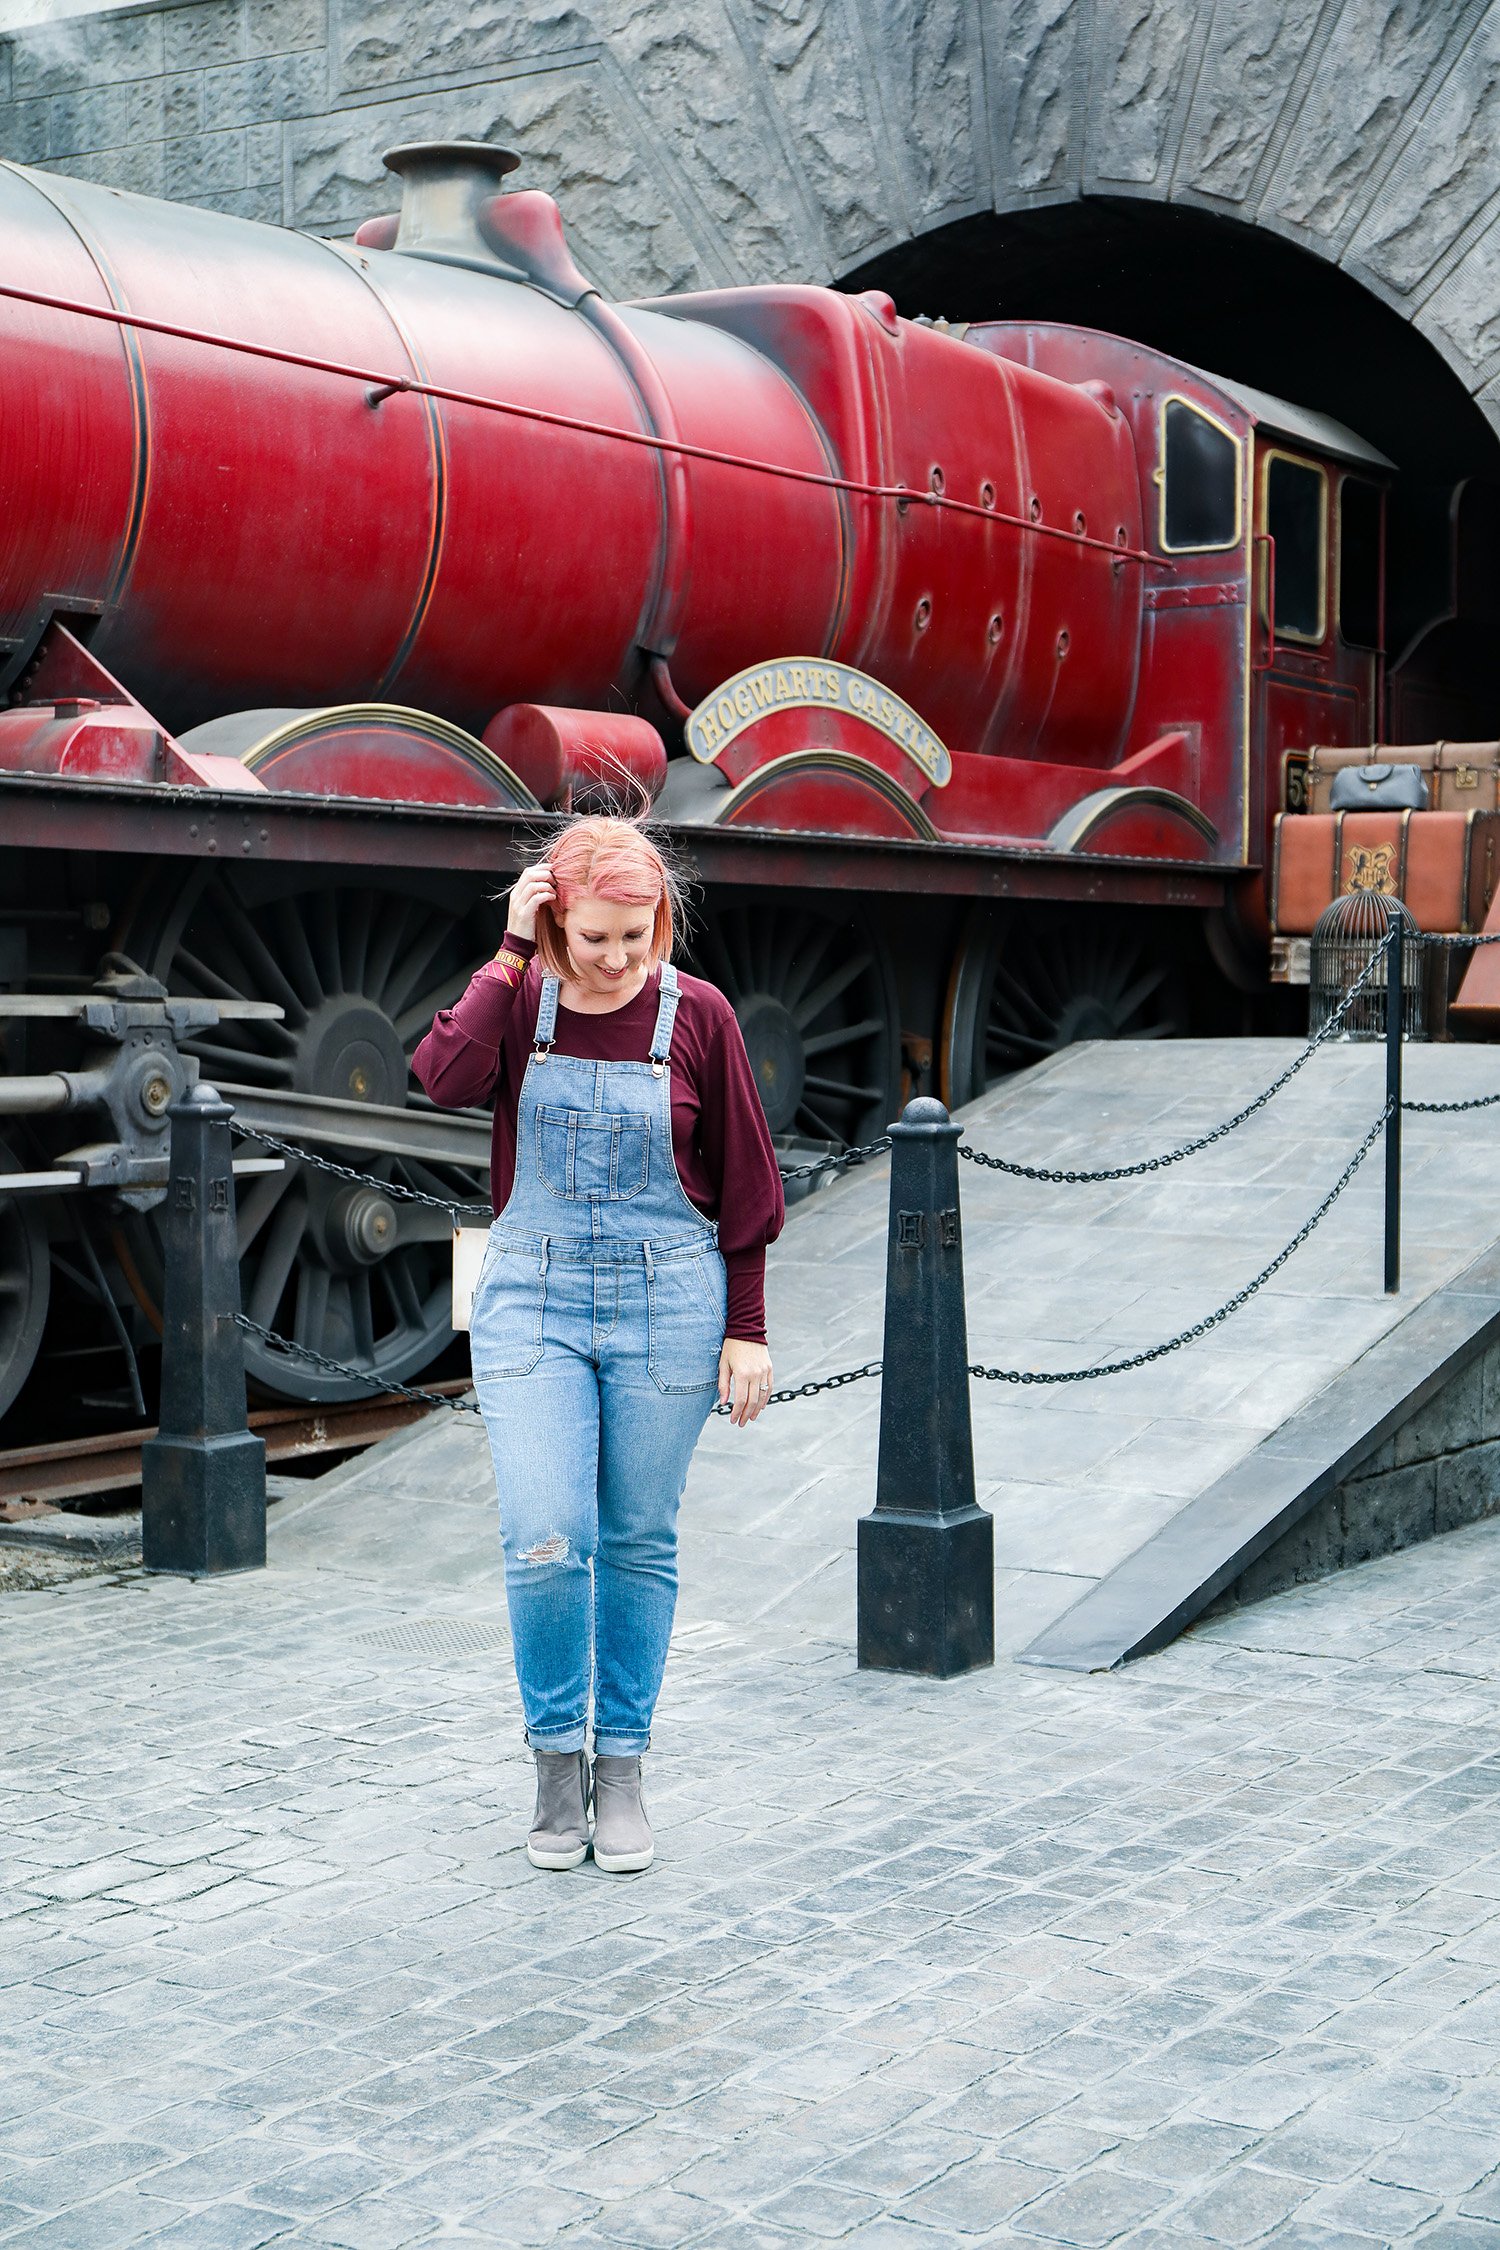 The Best Places to Take Pictures in The Wizarding World of Harry Potter